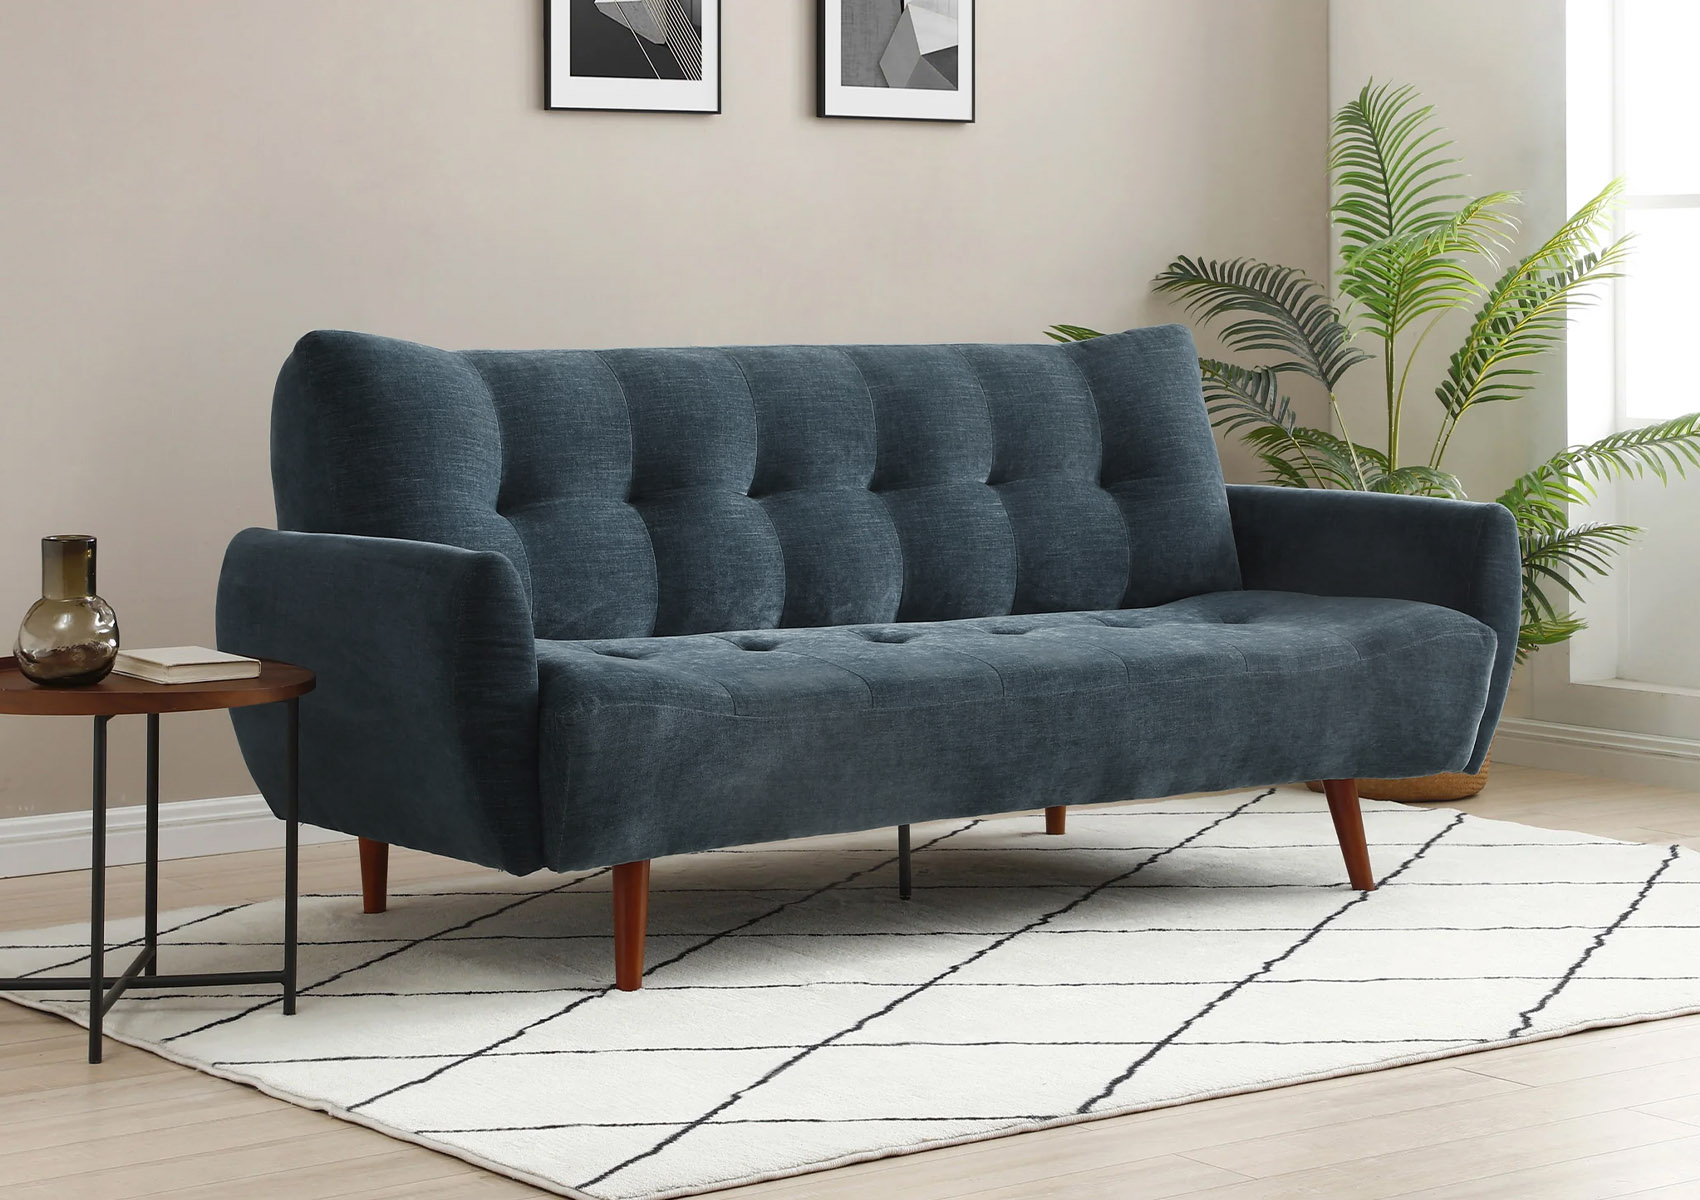 View Oasis Navy Sofa Bed Time4Sleep information